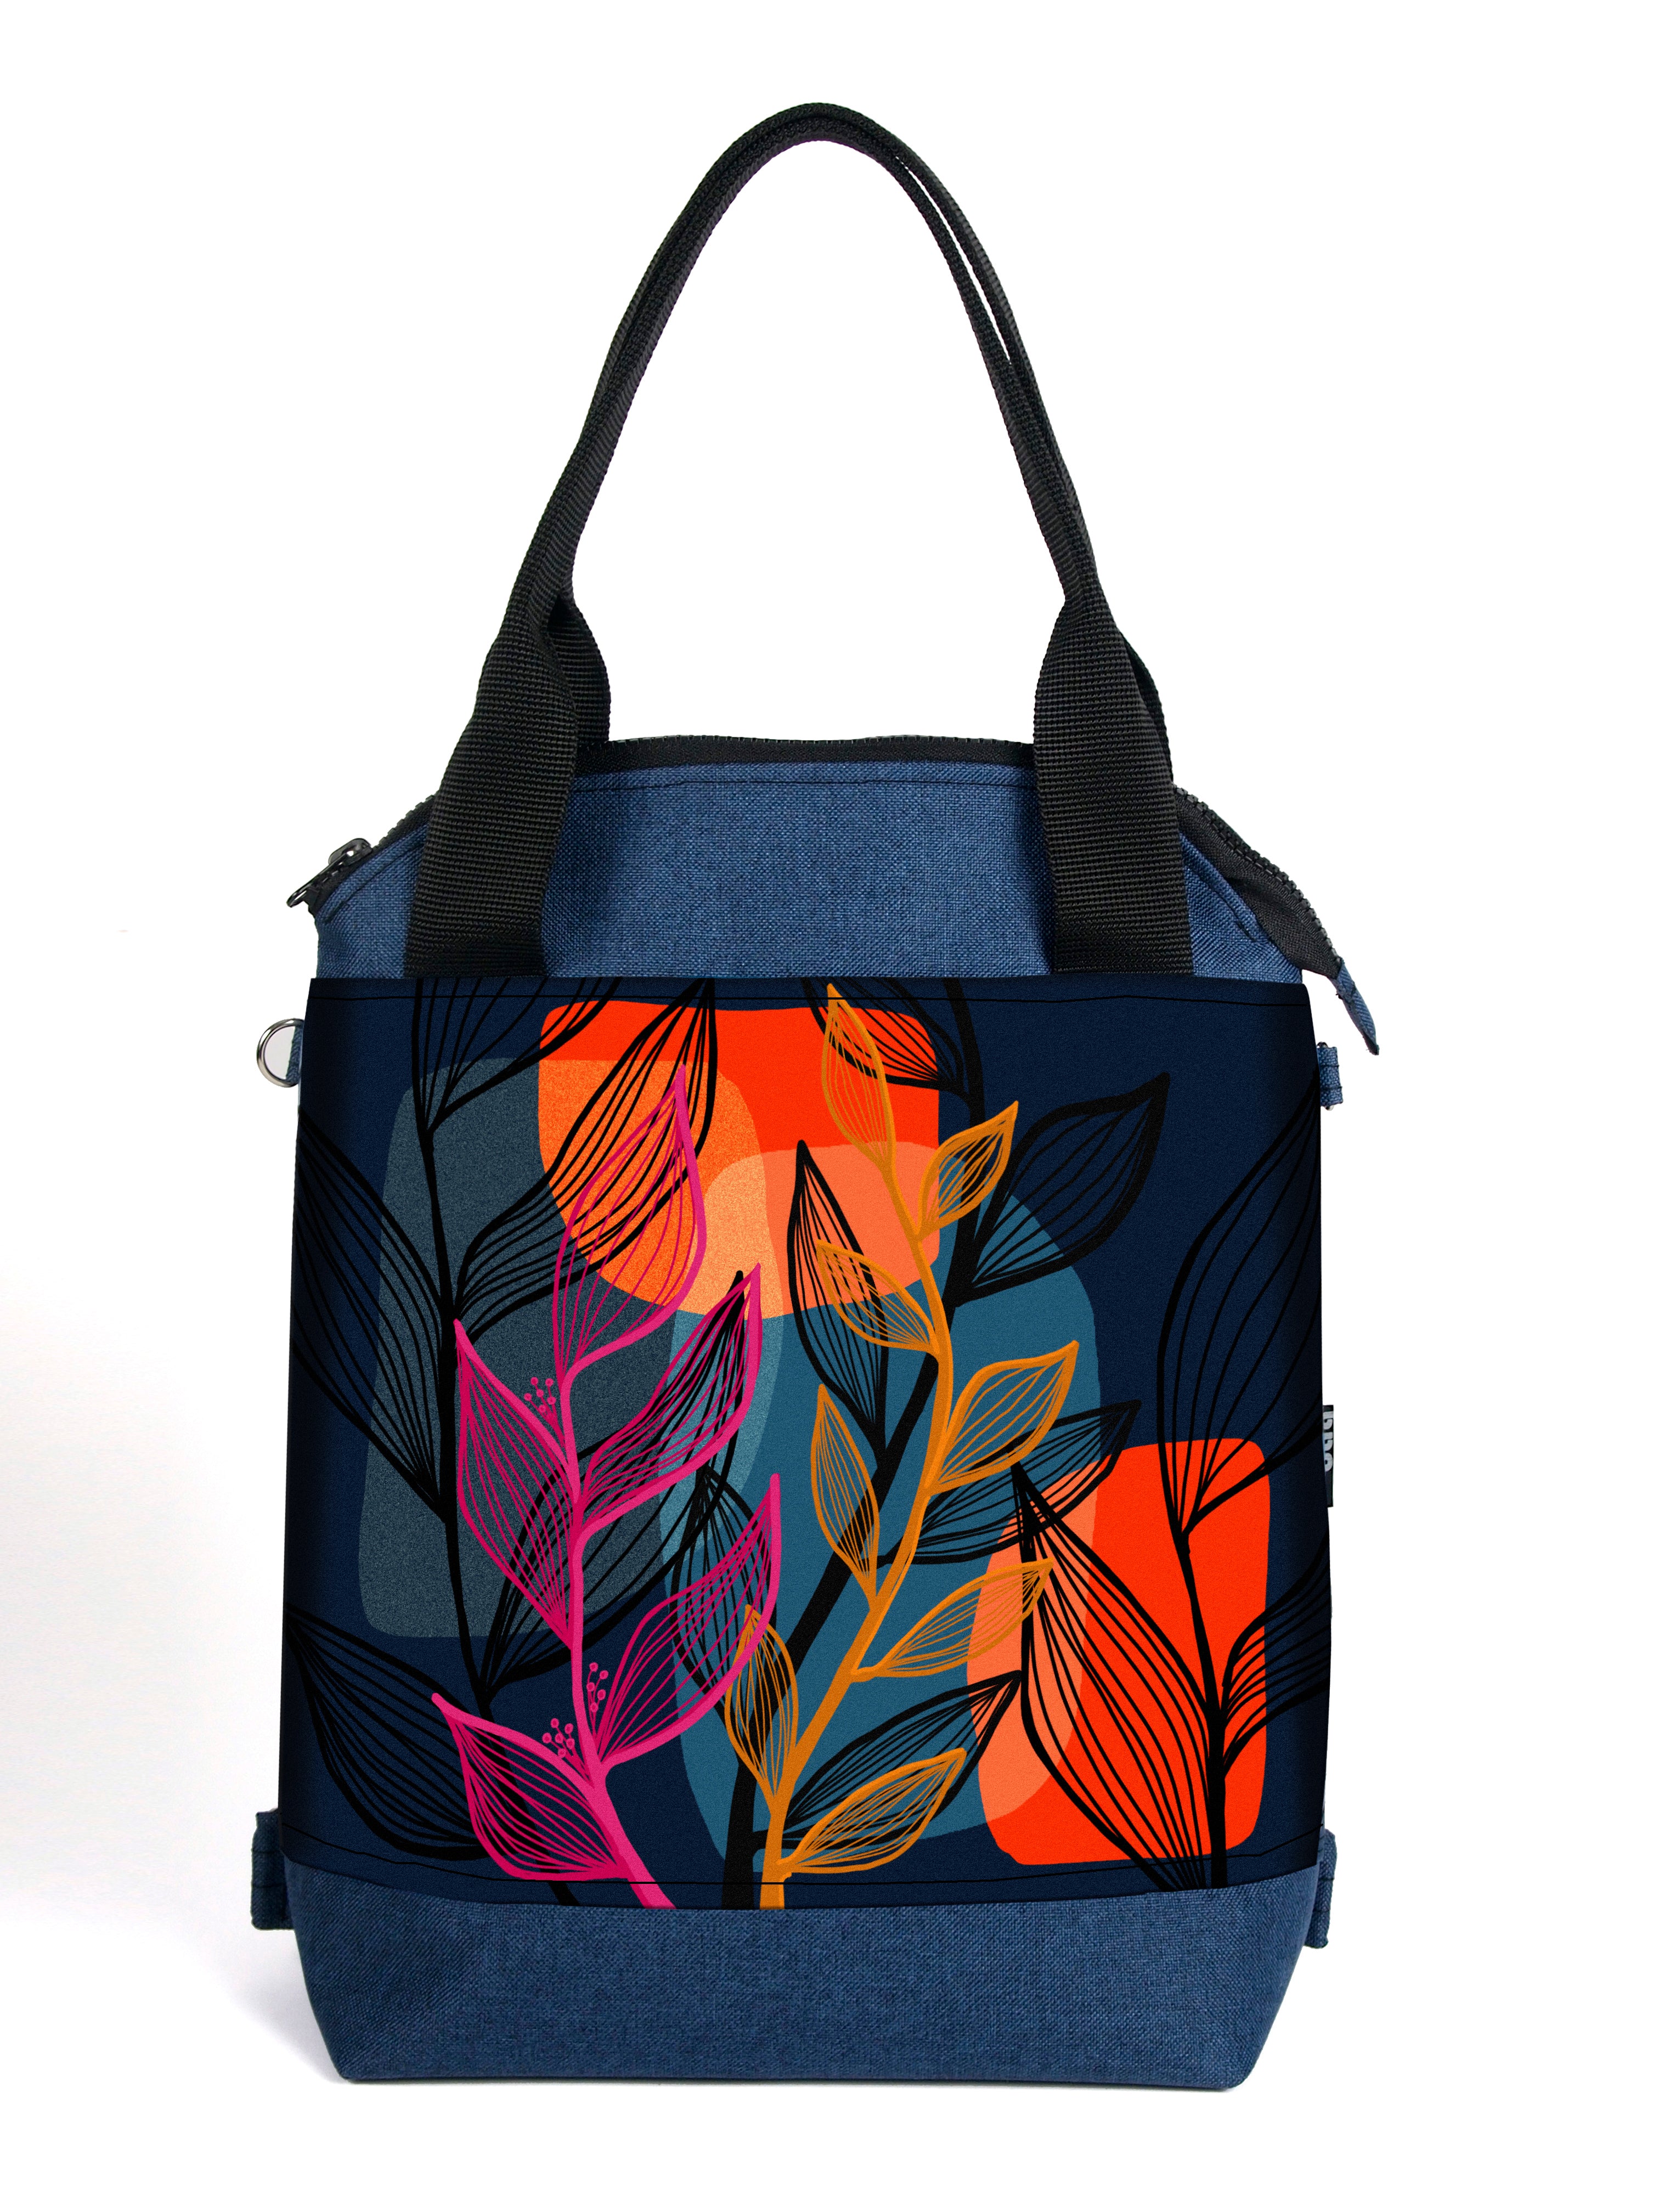 Bardo classic backpack textiles - Summer night - Premium Textiles from BARDO ART WORKS - Just lvabstract, black, floral, handemade, leaves, tablet, urban style, woman, work bag89.00! Shop now at BARDO ART WORKS